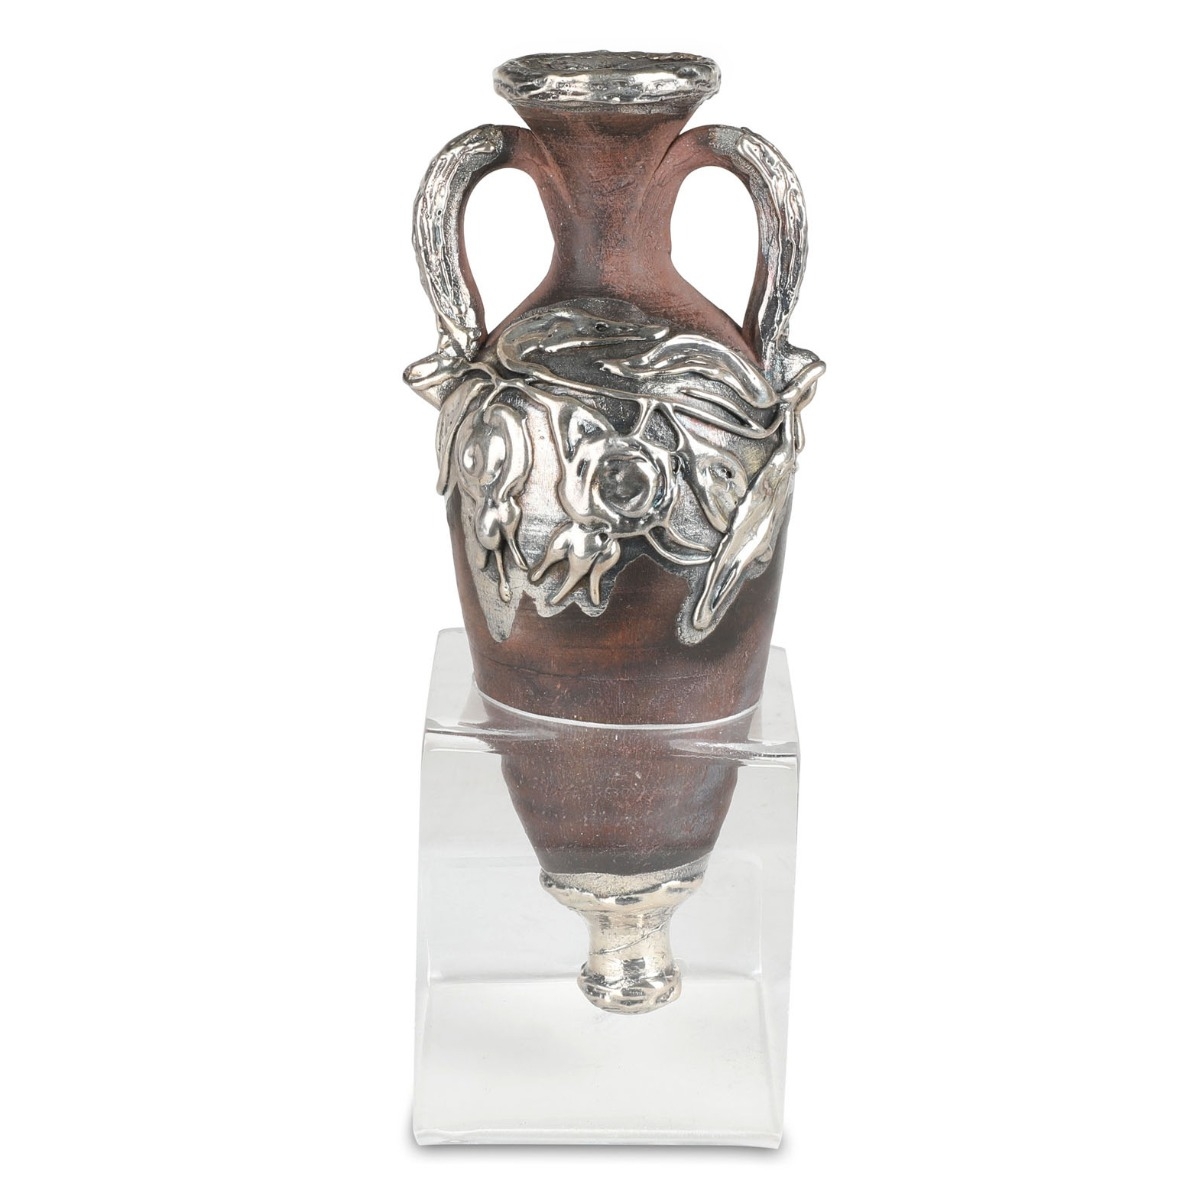 925 Sterling Silver Decorated Ceramic Wine Pitcher - 1